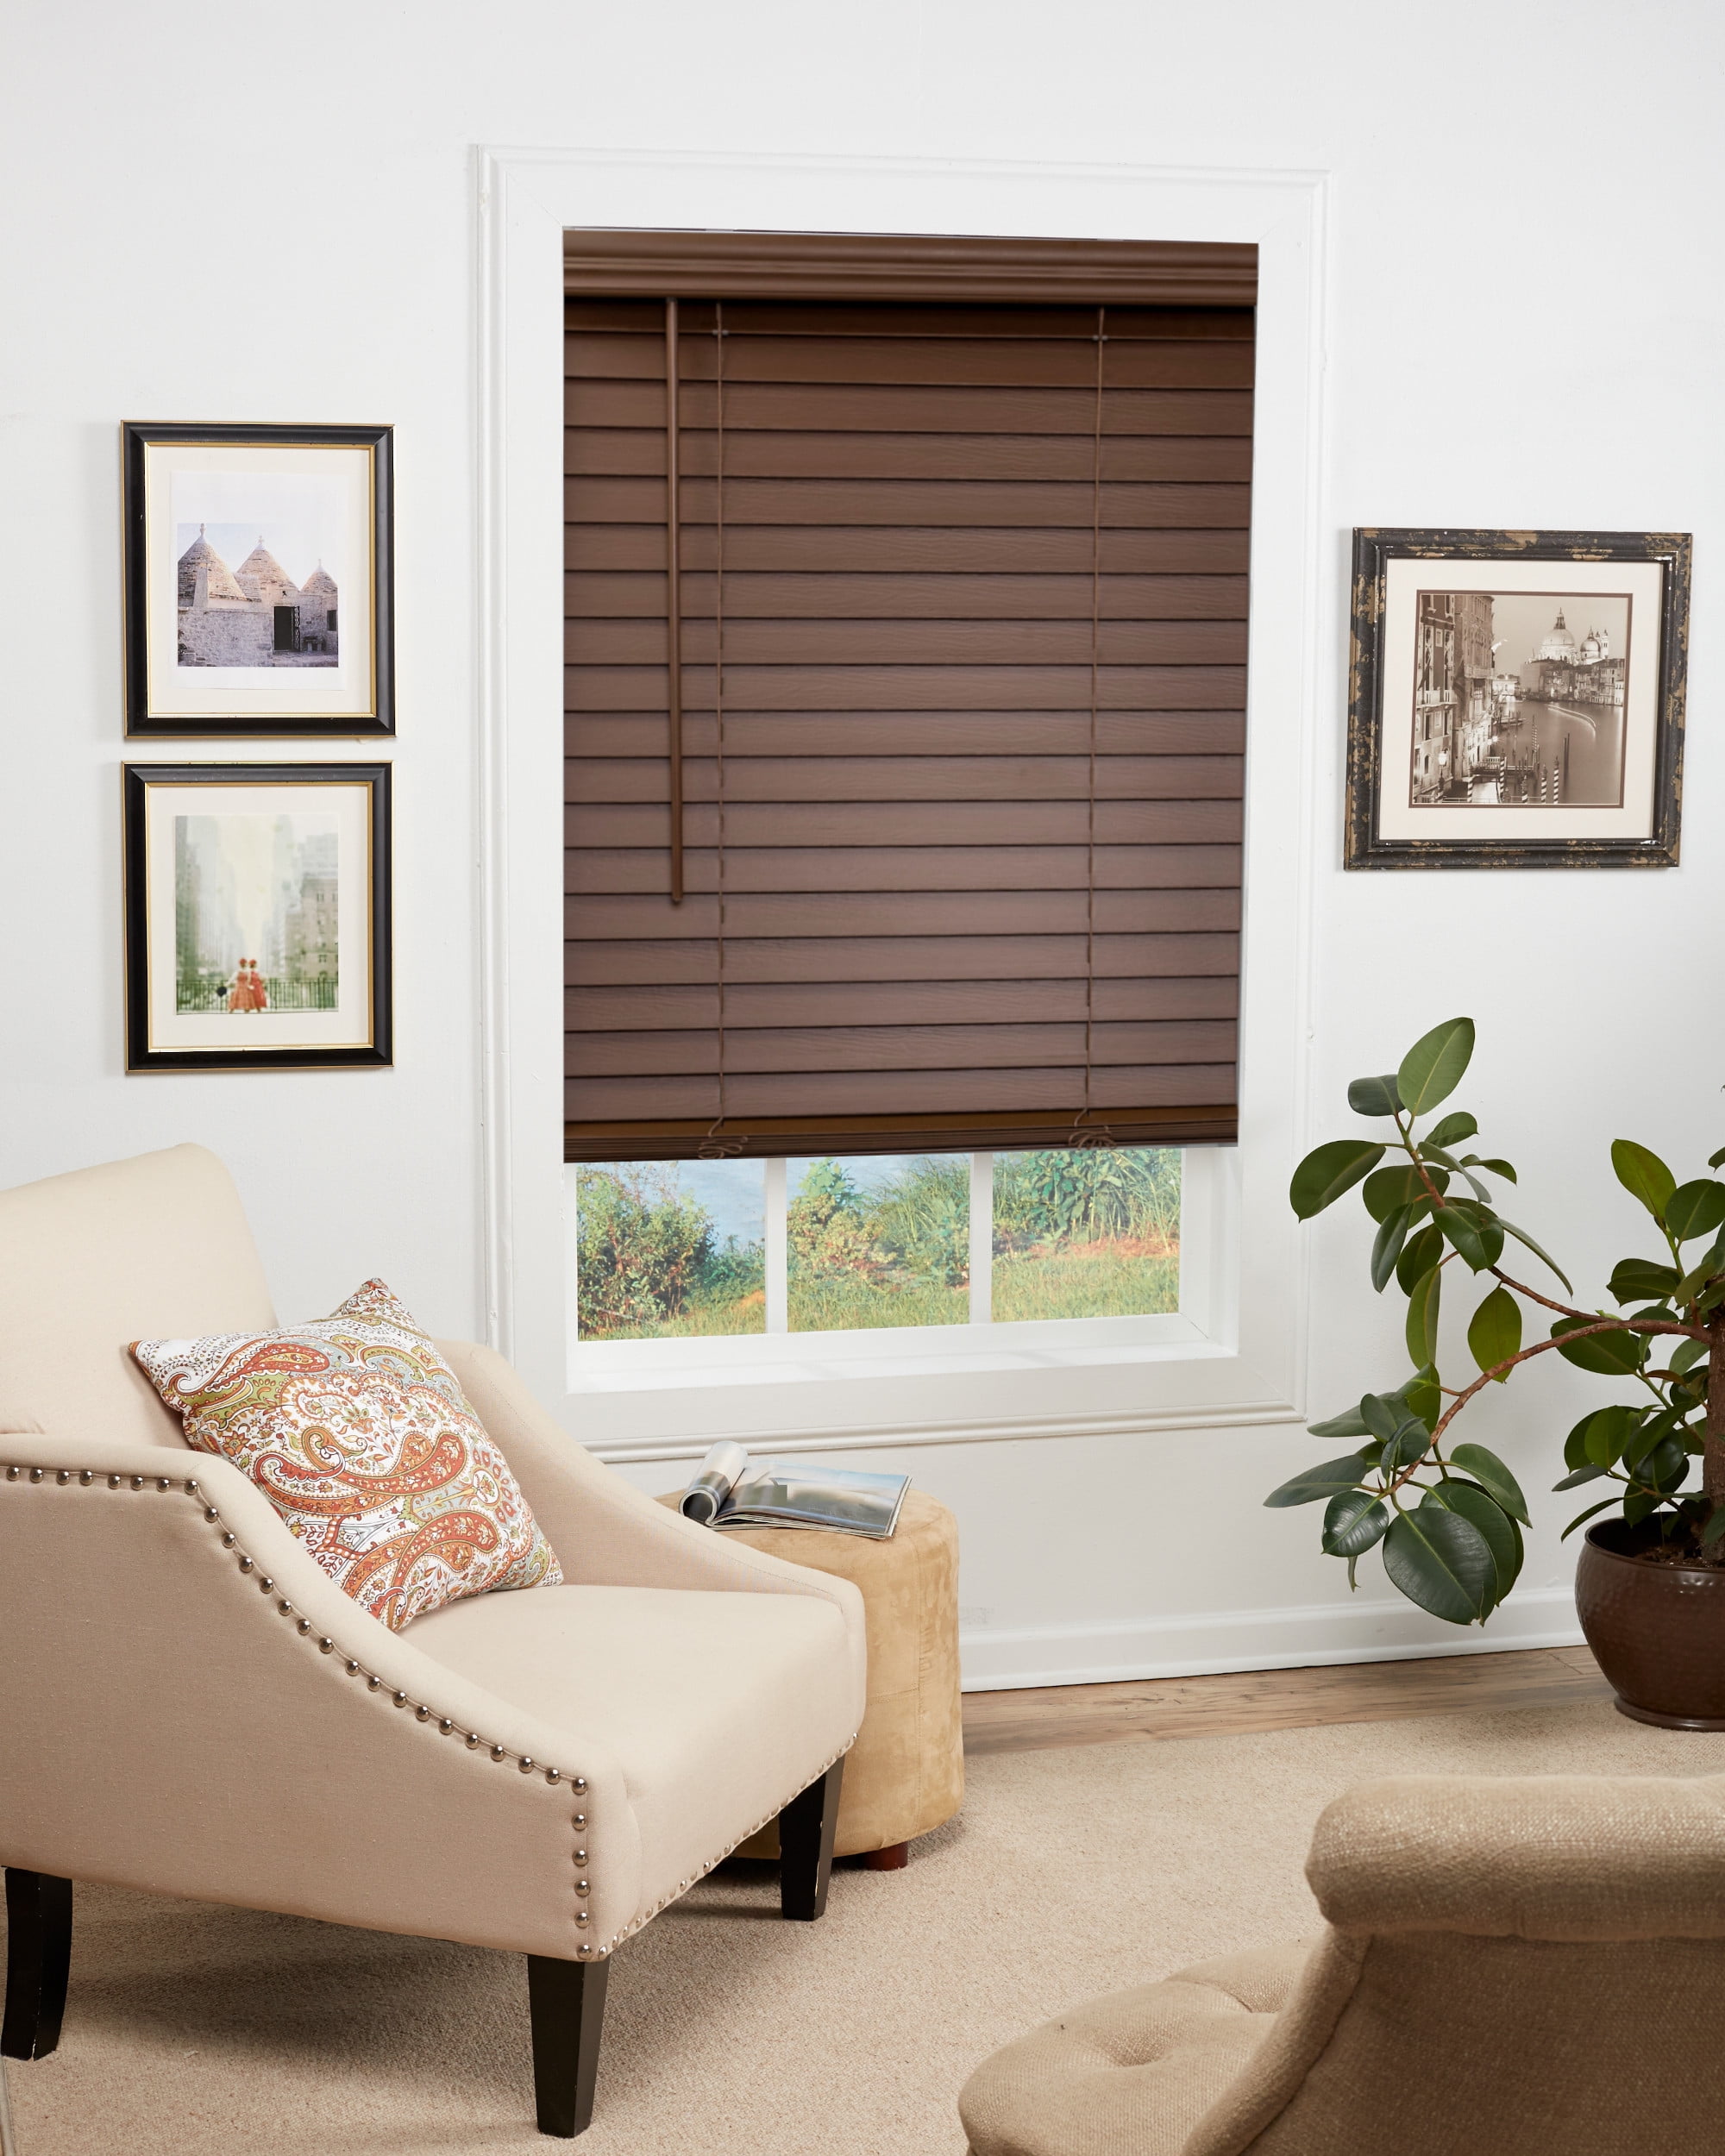 Details about   PVC Wooden Wood Grain Effect Venetian Window Blind Curtain Home Office Easy Fit 